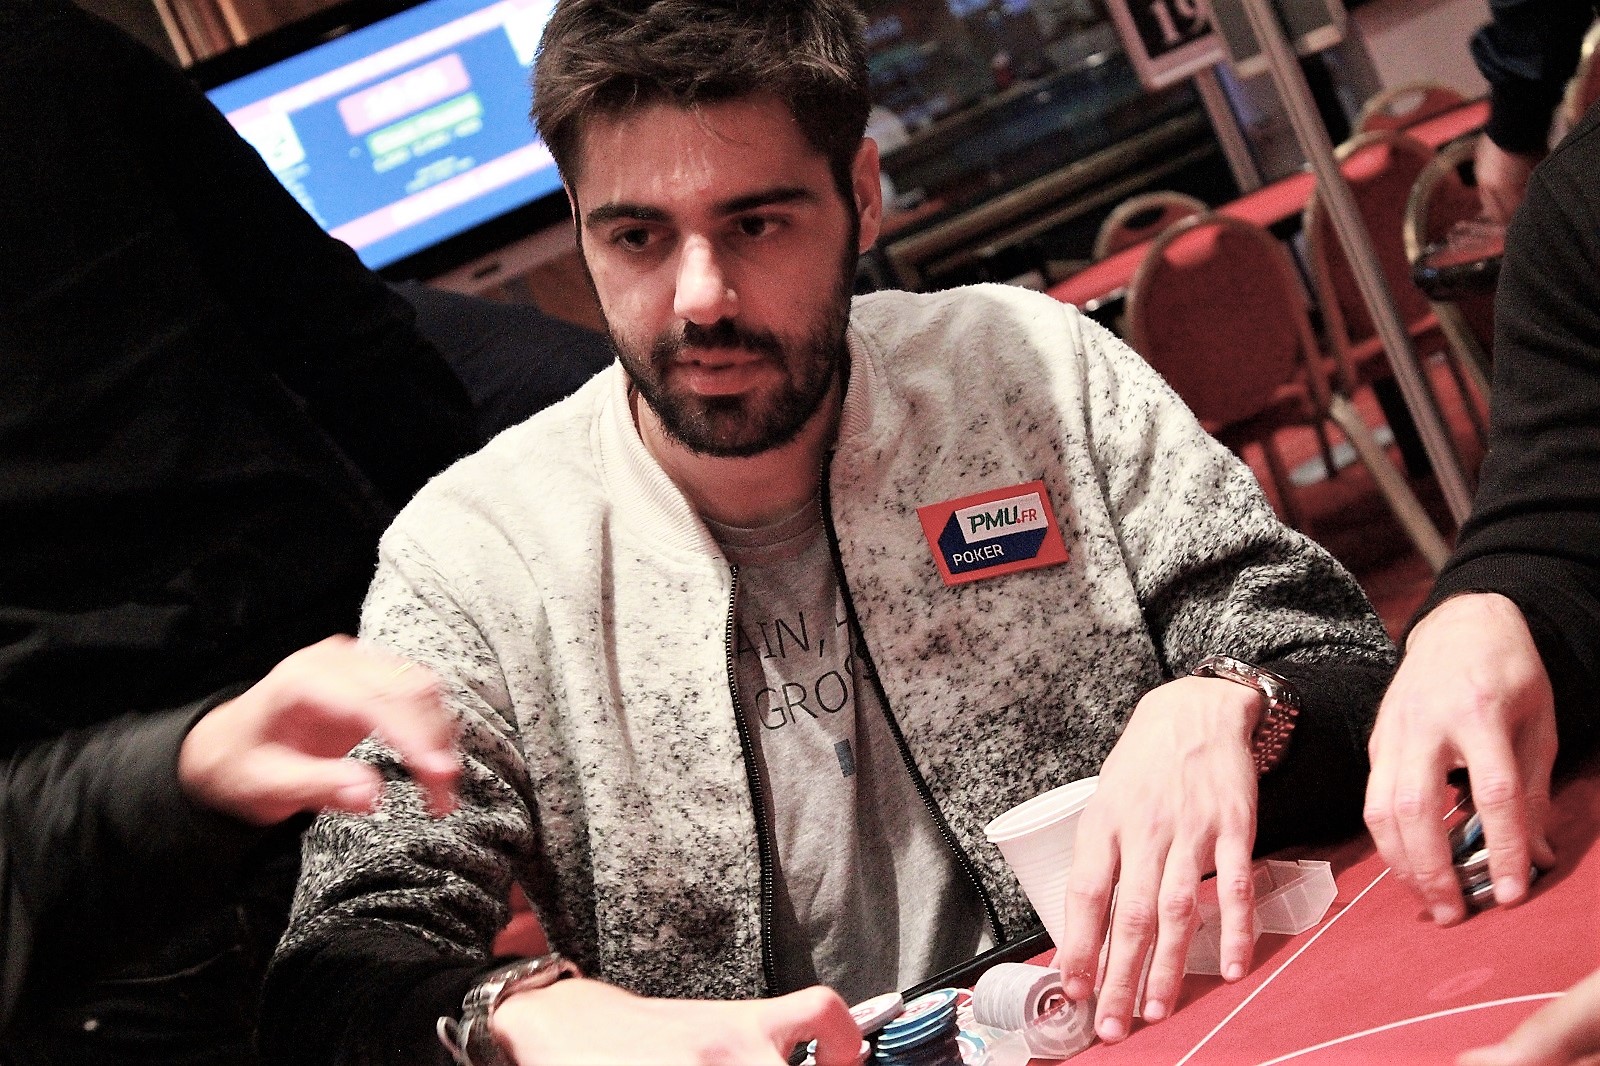 WSOP-C Cannes-Fin Day 1A: Yoh_Viral passe l’obstacle !